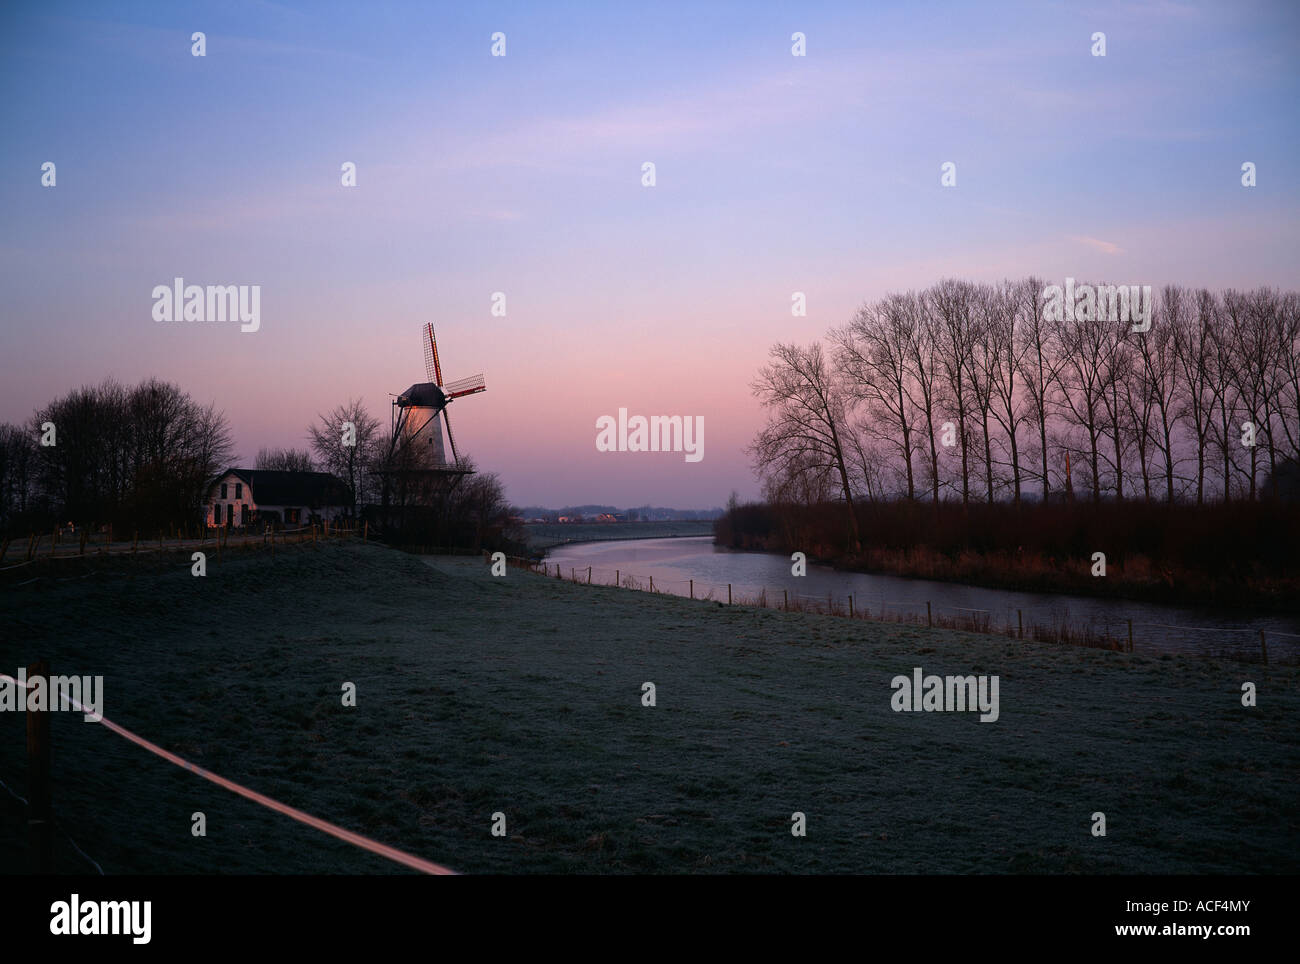 De Vlinder (The Butterfly) - a working windmill on the Appeldijk, River Linge at Deil, The Netherlands, on a frosty morning. Stock Photo